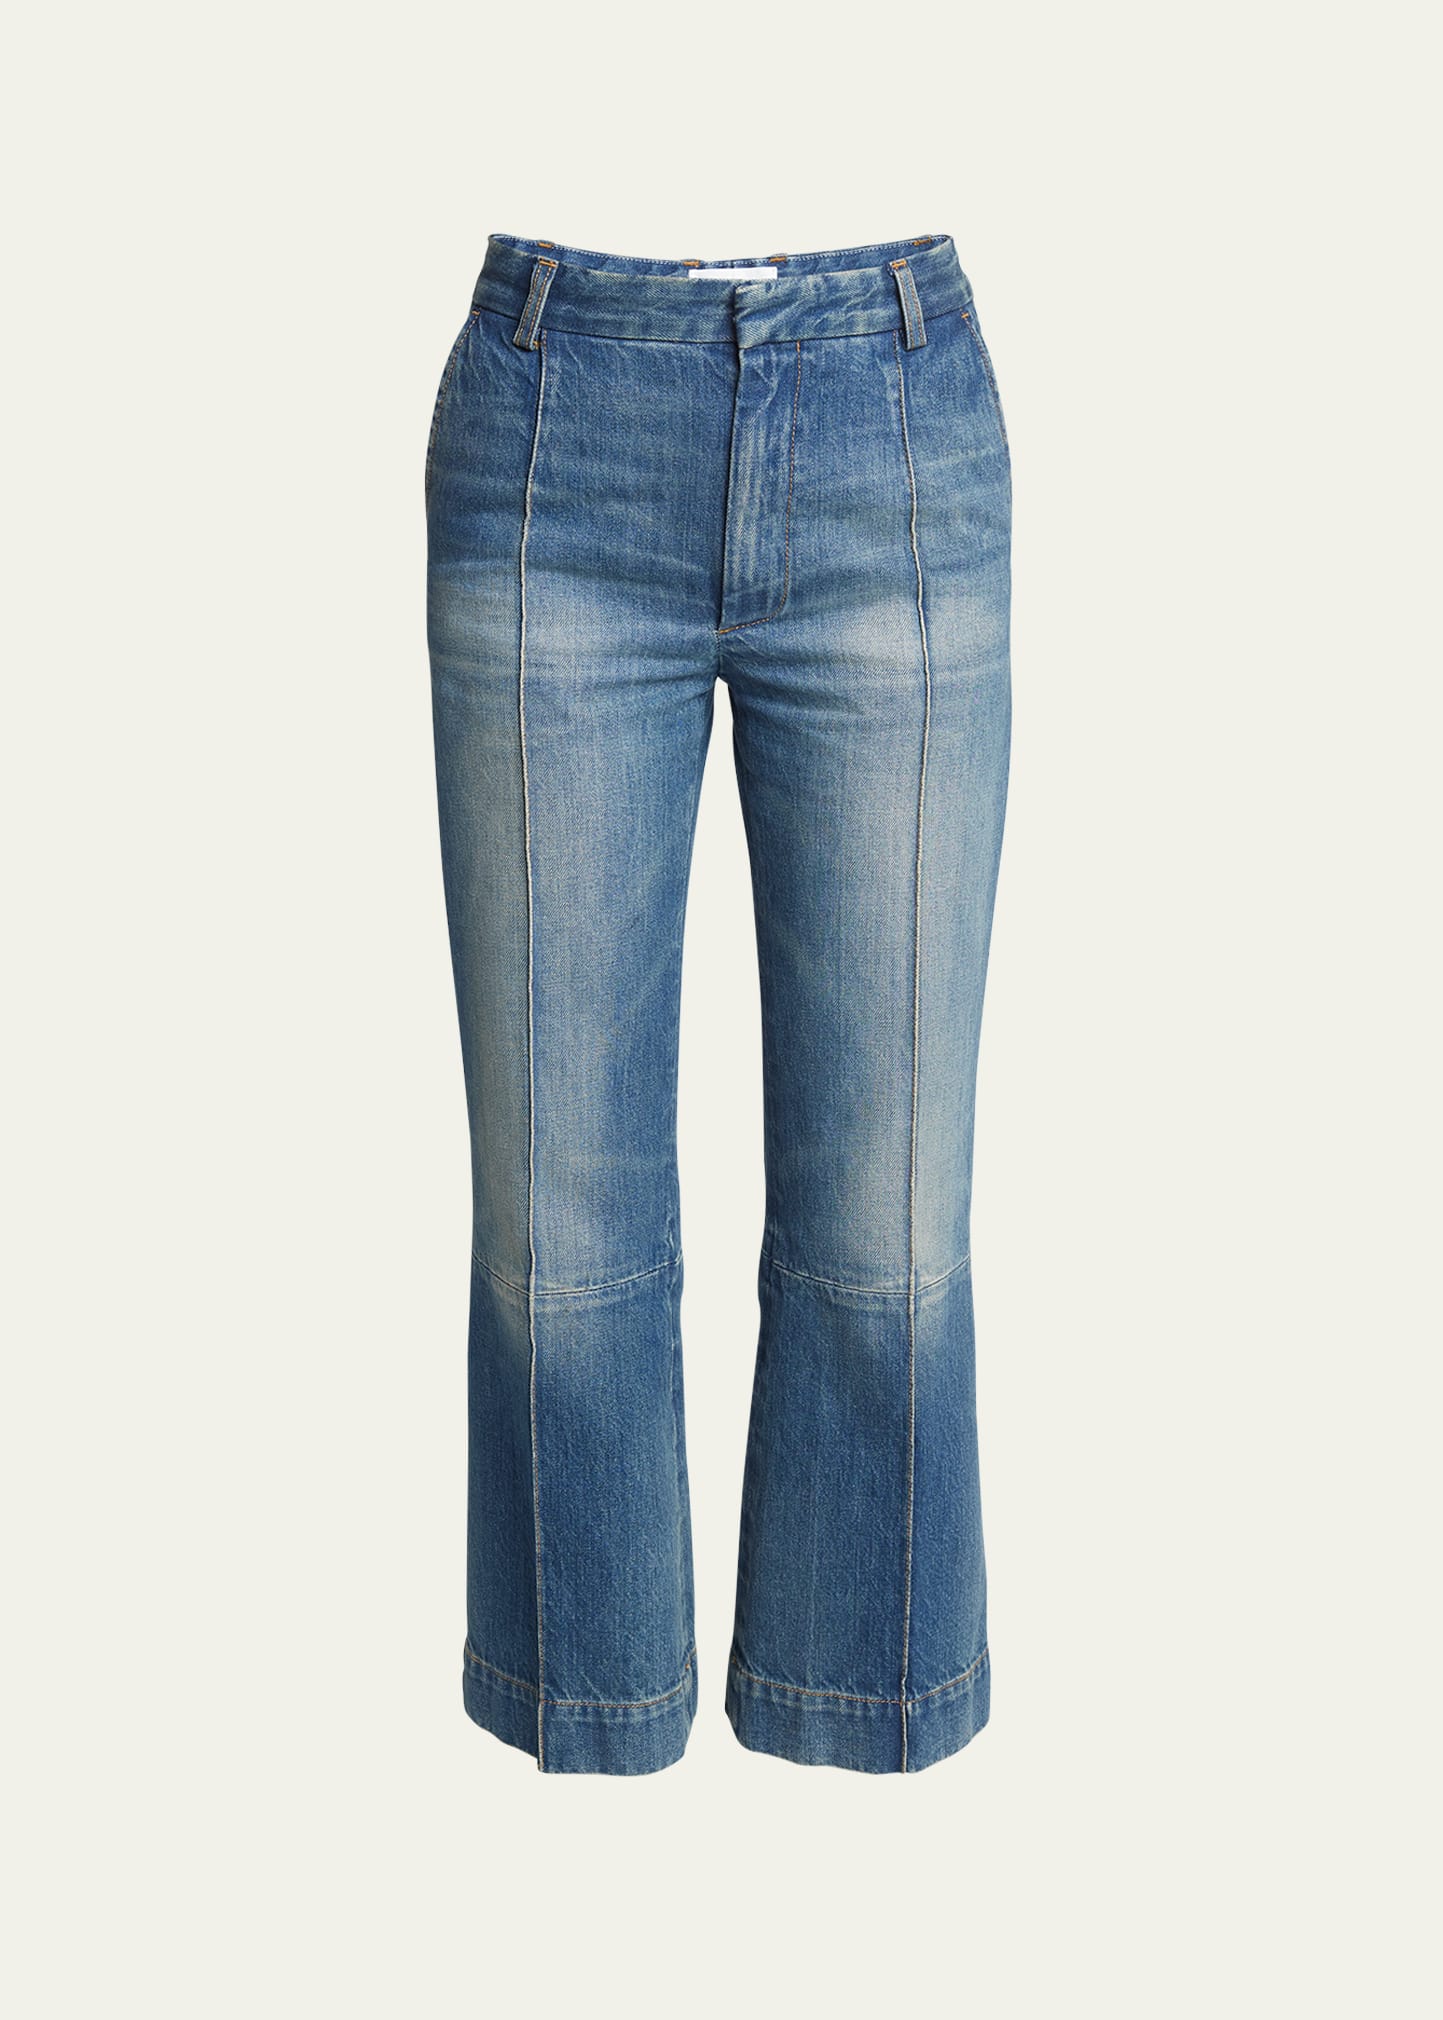 Victoria Beckham Cropped Kick Flare Jeans In Indigrey Wash